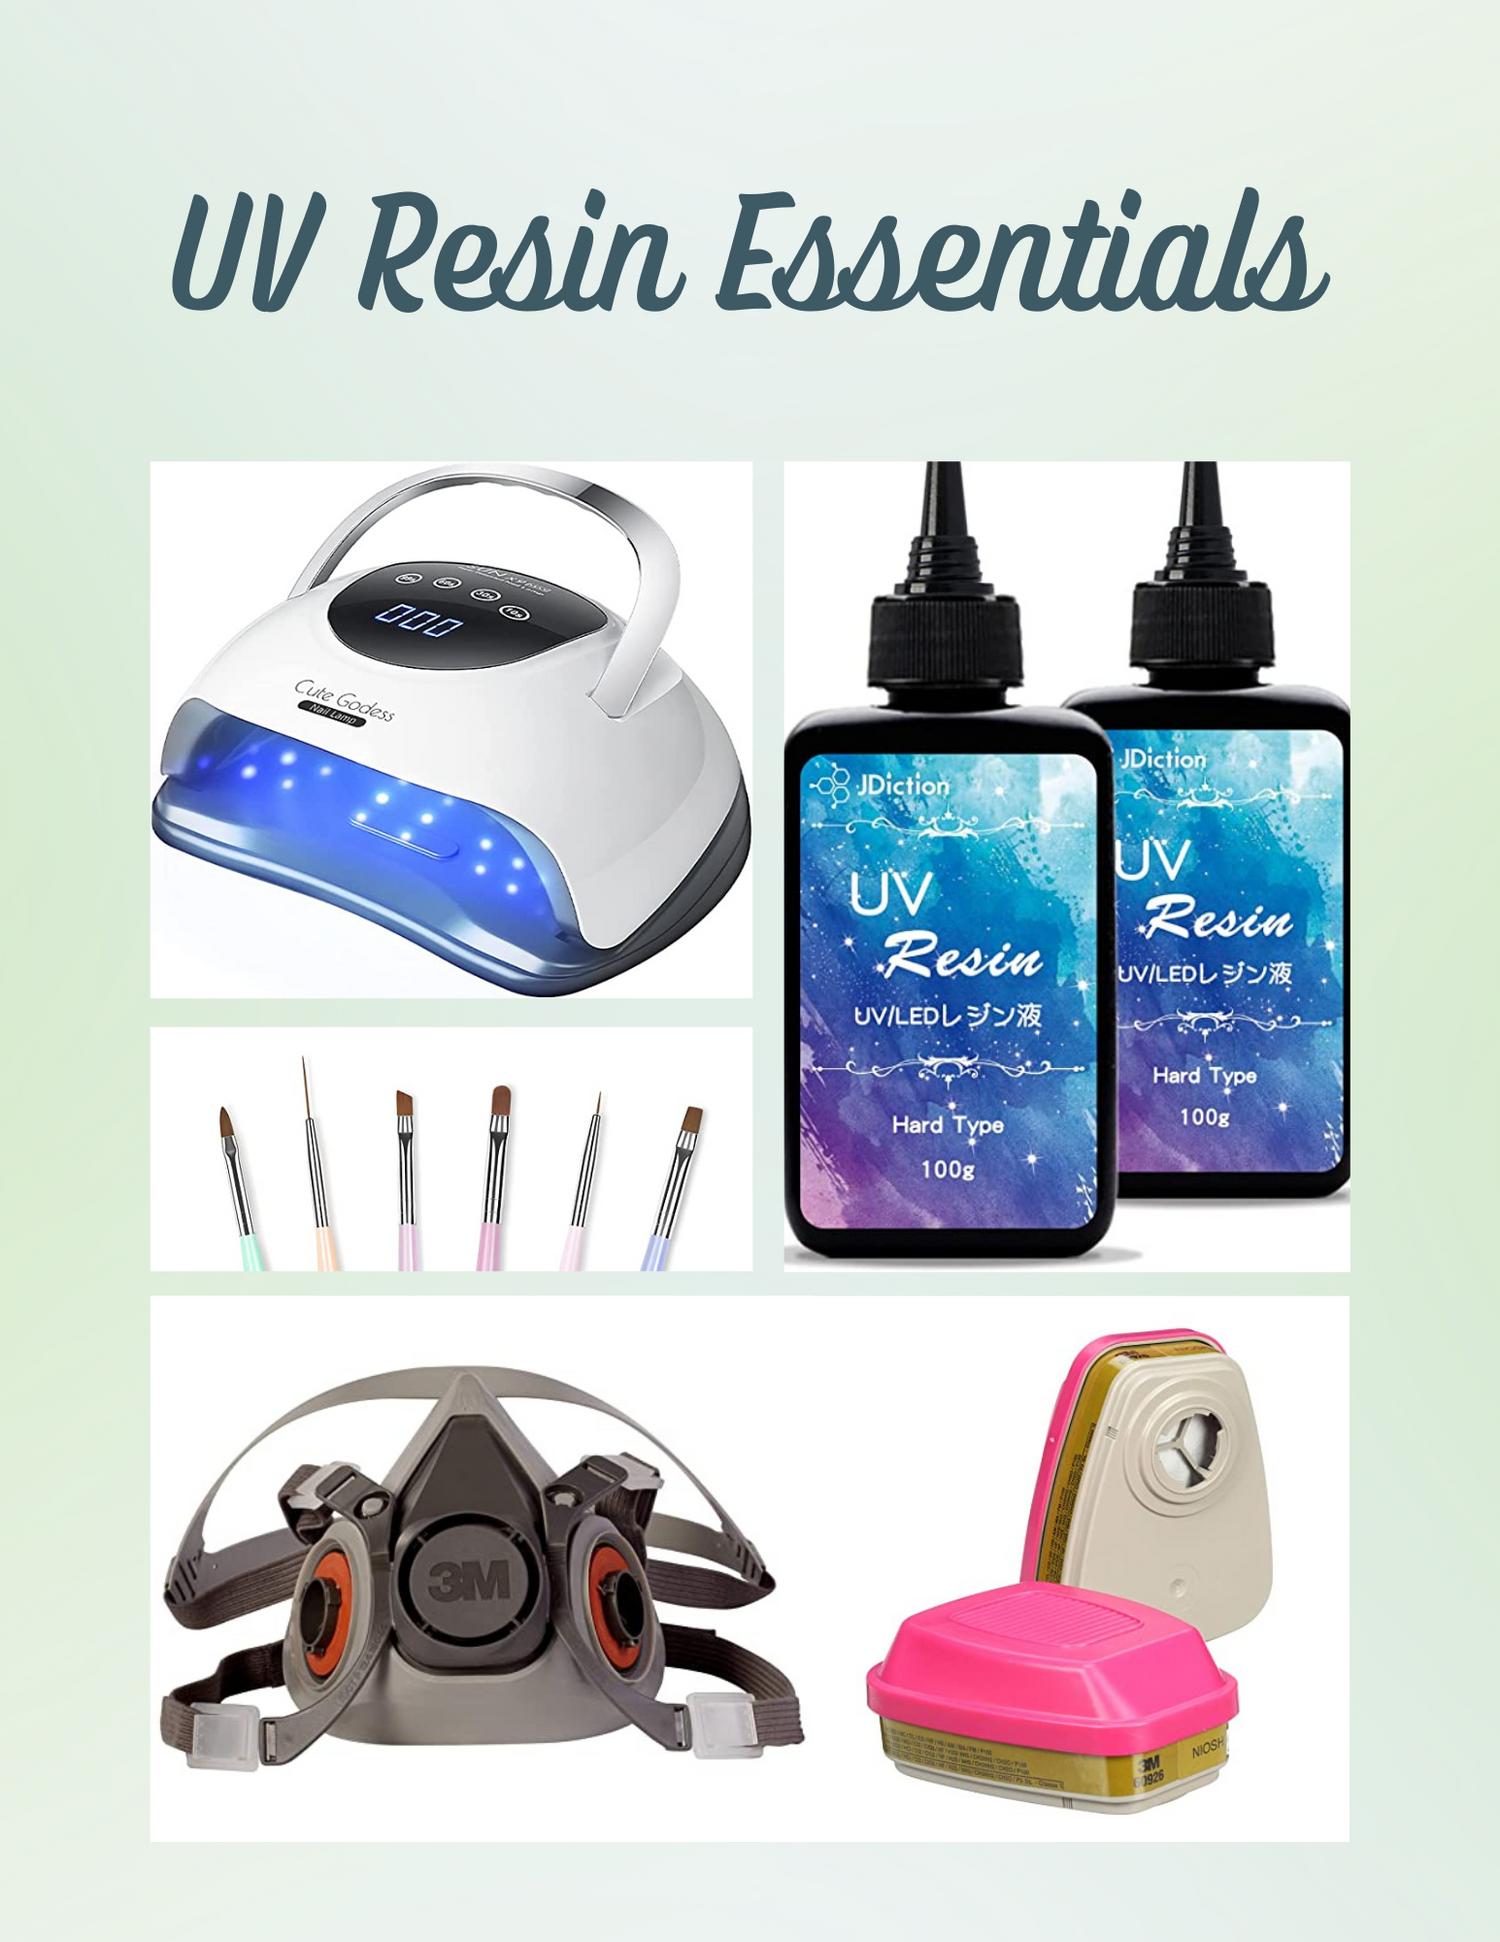 Tools that you will use to safely add UV resin to polymer clay